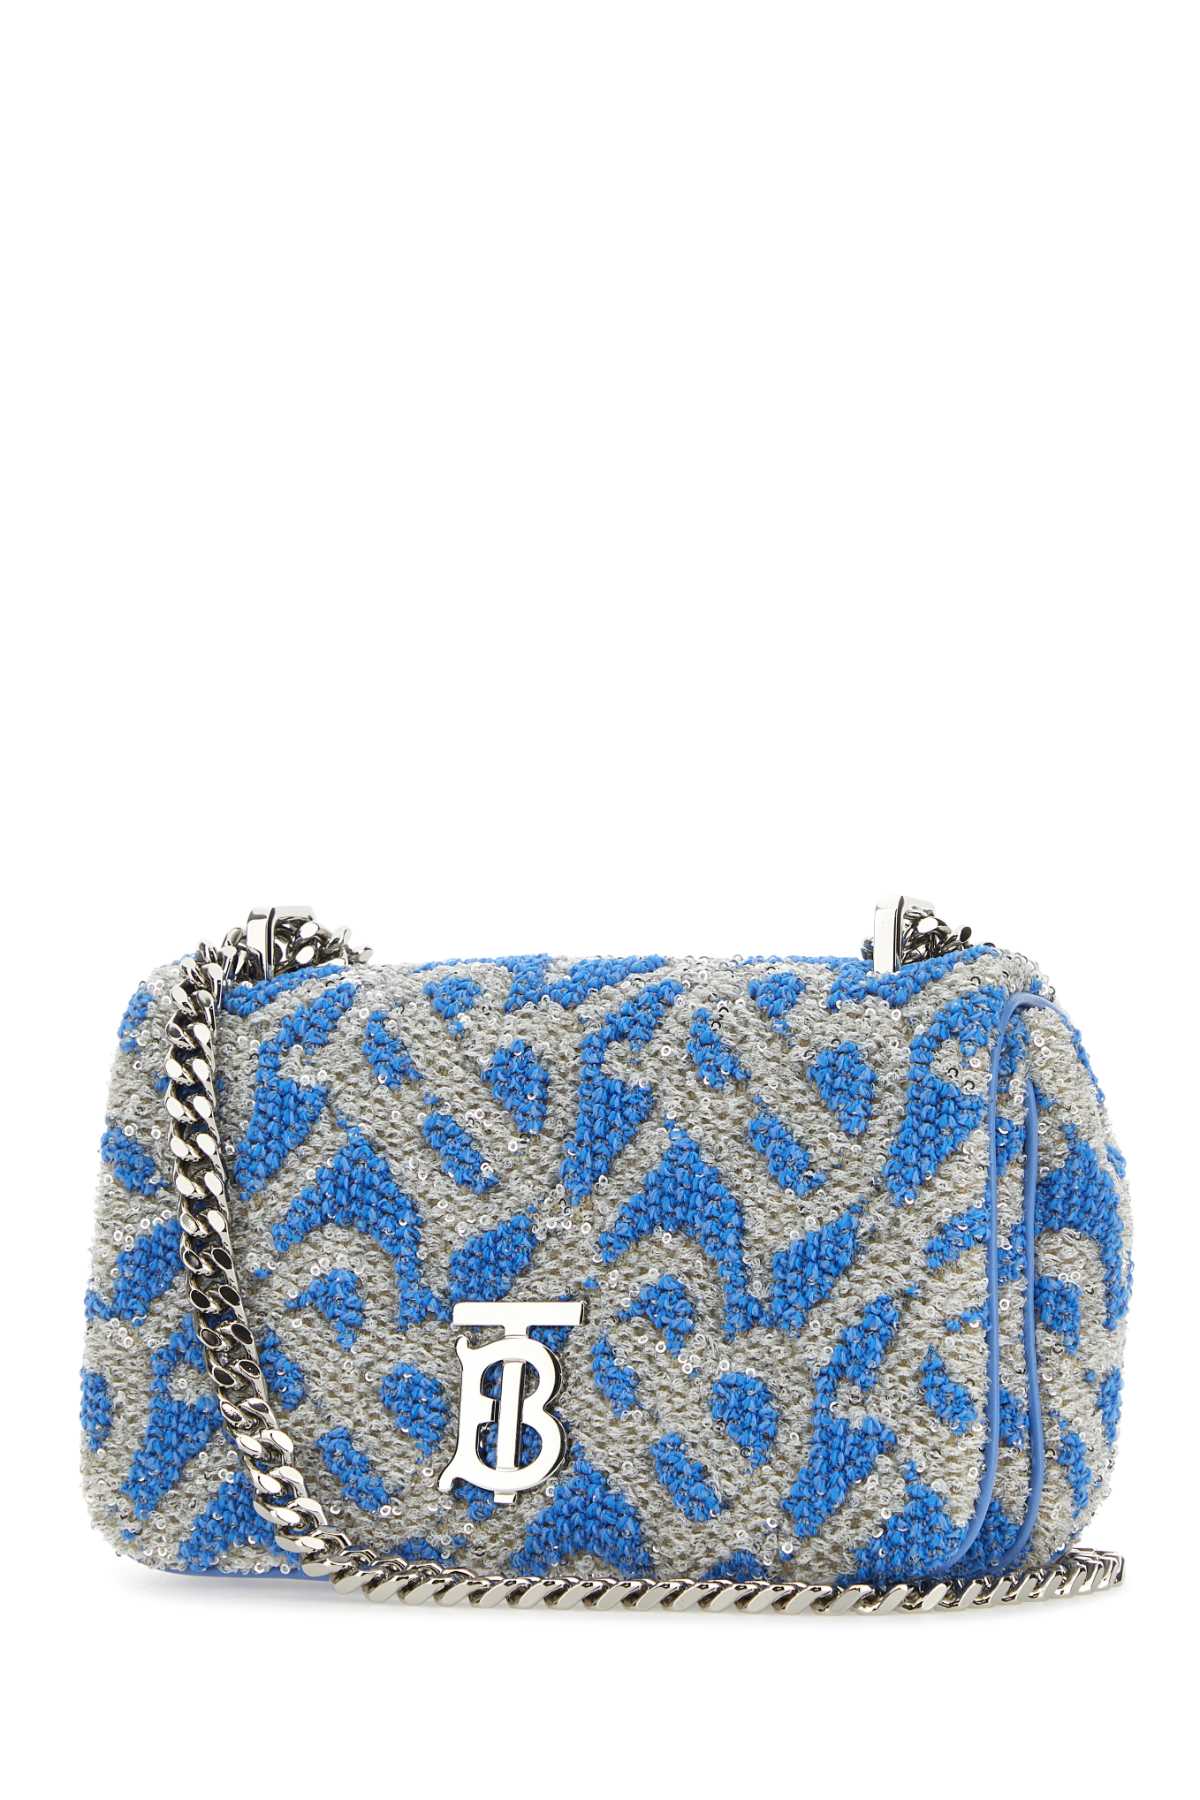 Shop Burberry Embroidered Fabric Mini Lola Shoulder Bag In Coolcornflowerblue